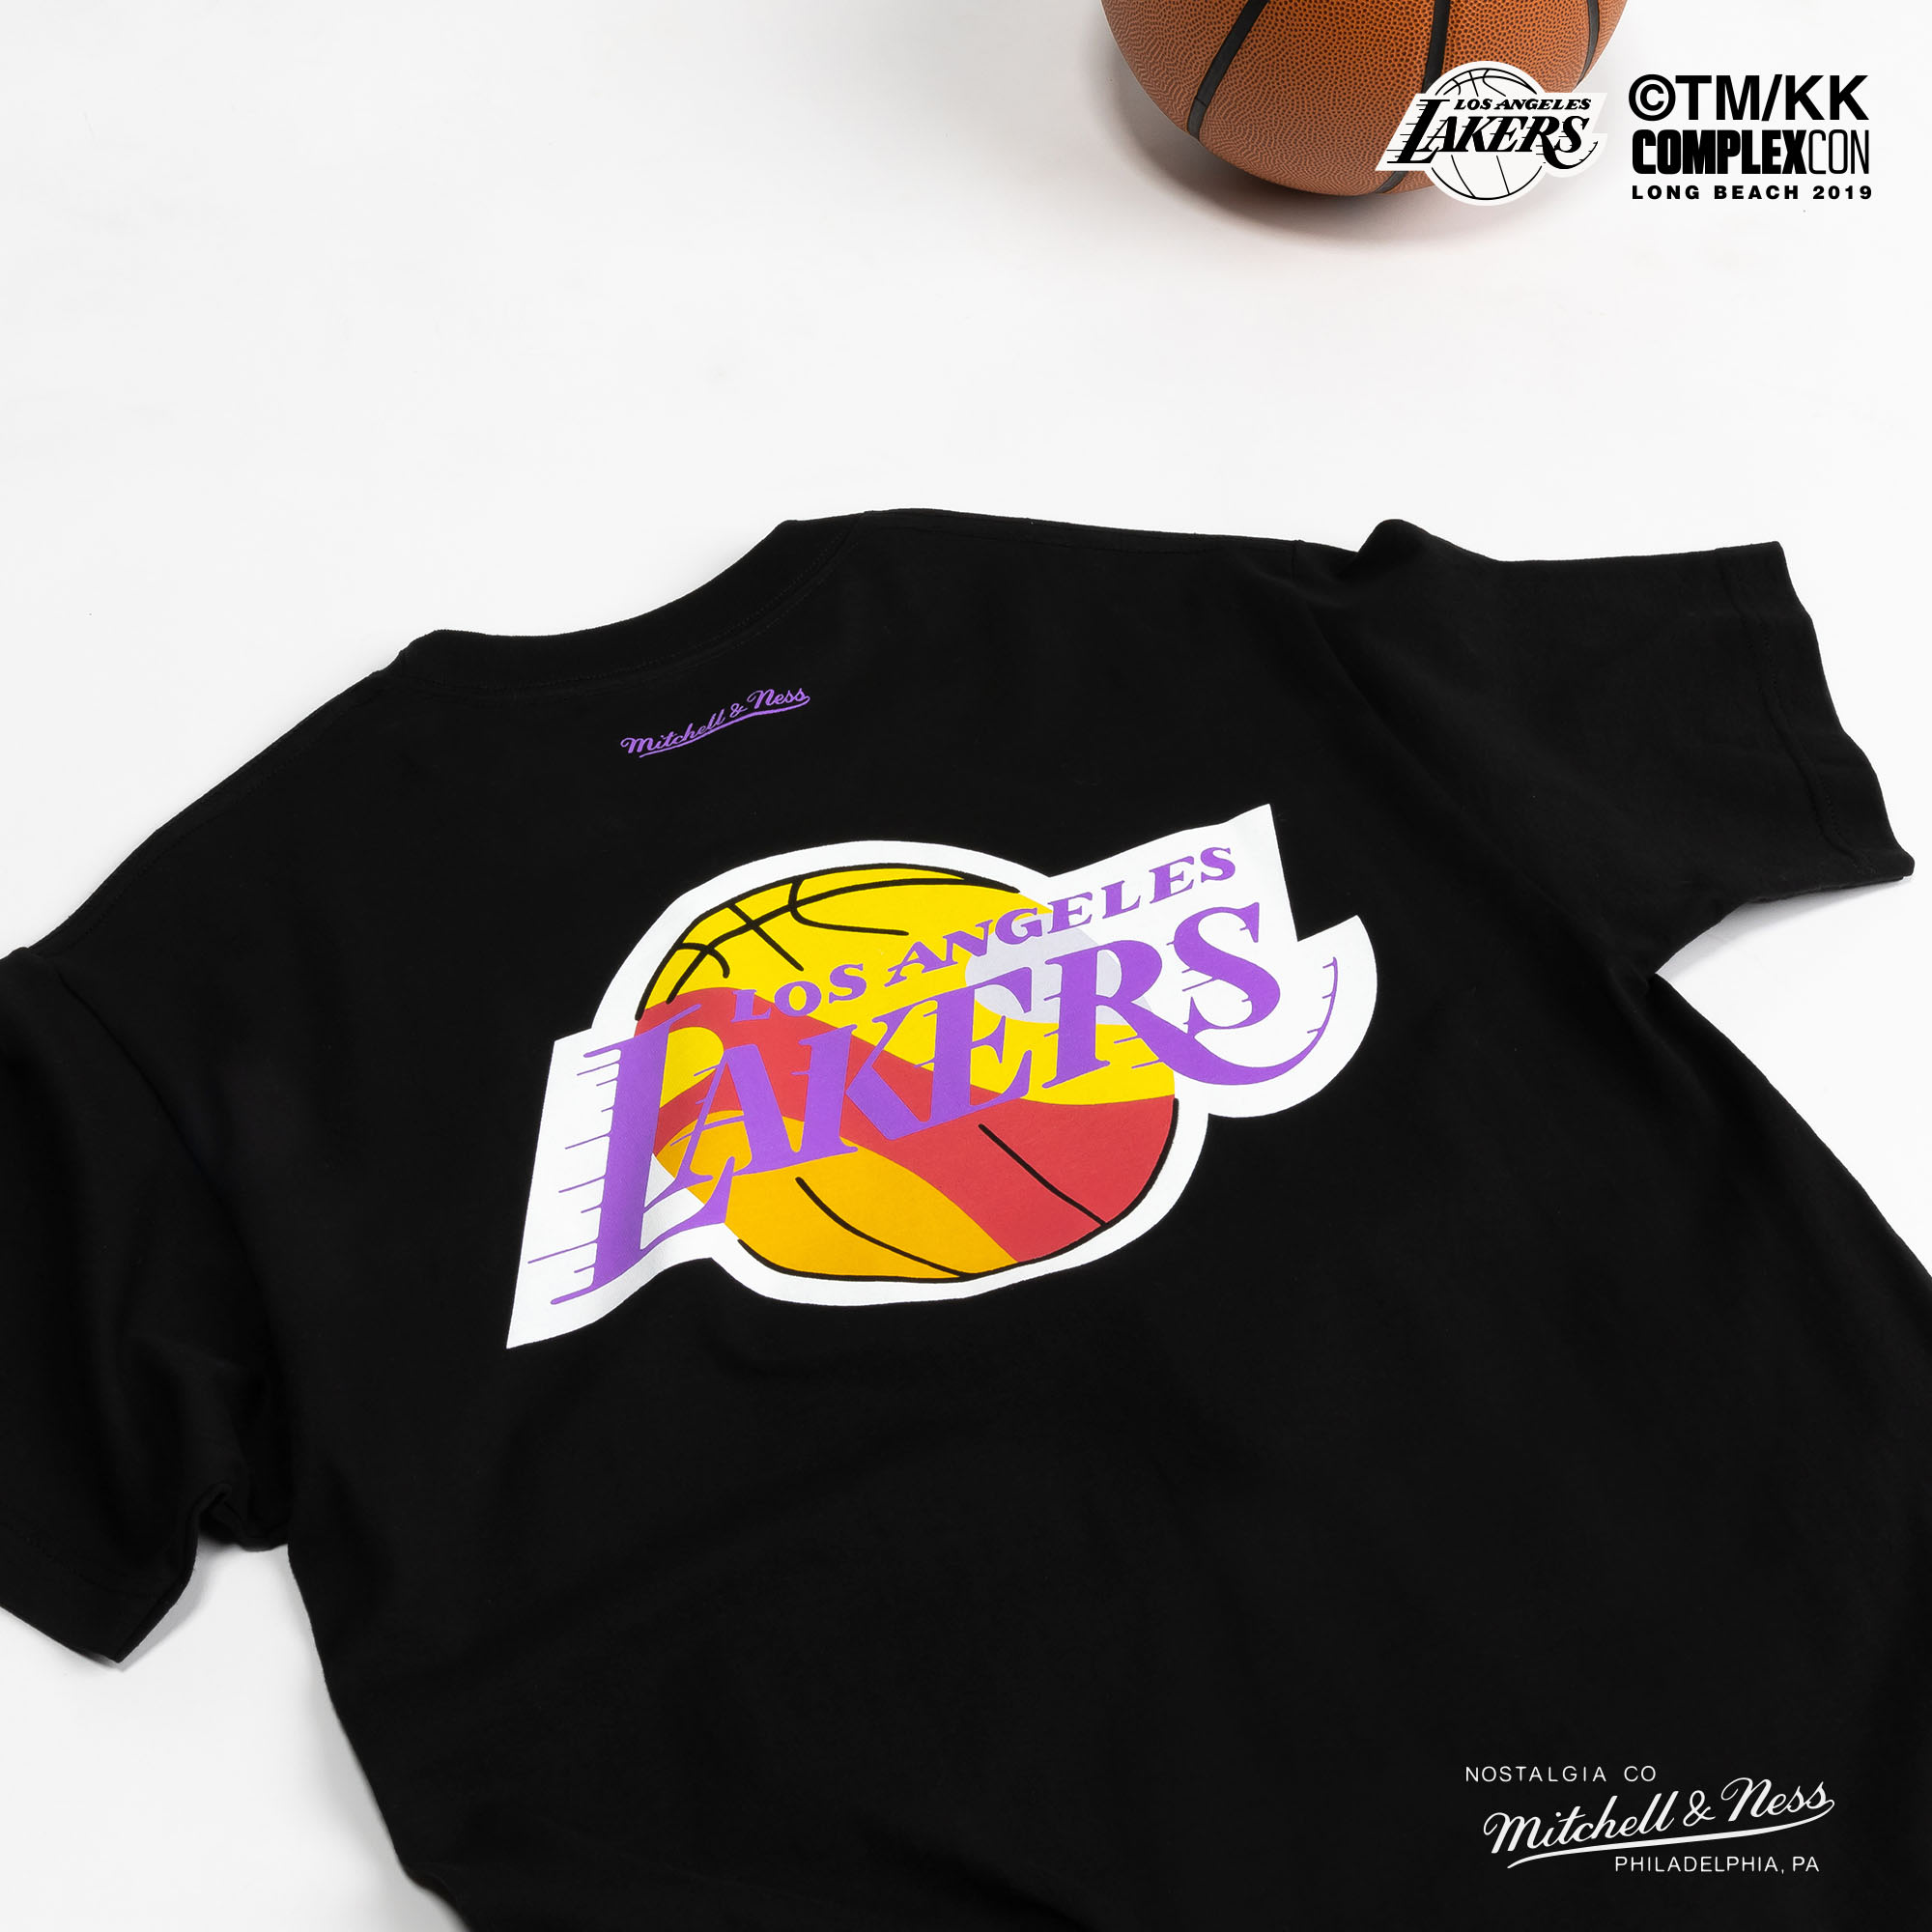 Takashi Murakami Designs Los Angeles Lakers Merch for ComplexCon Long ...